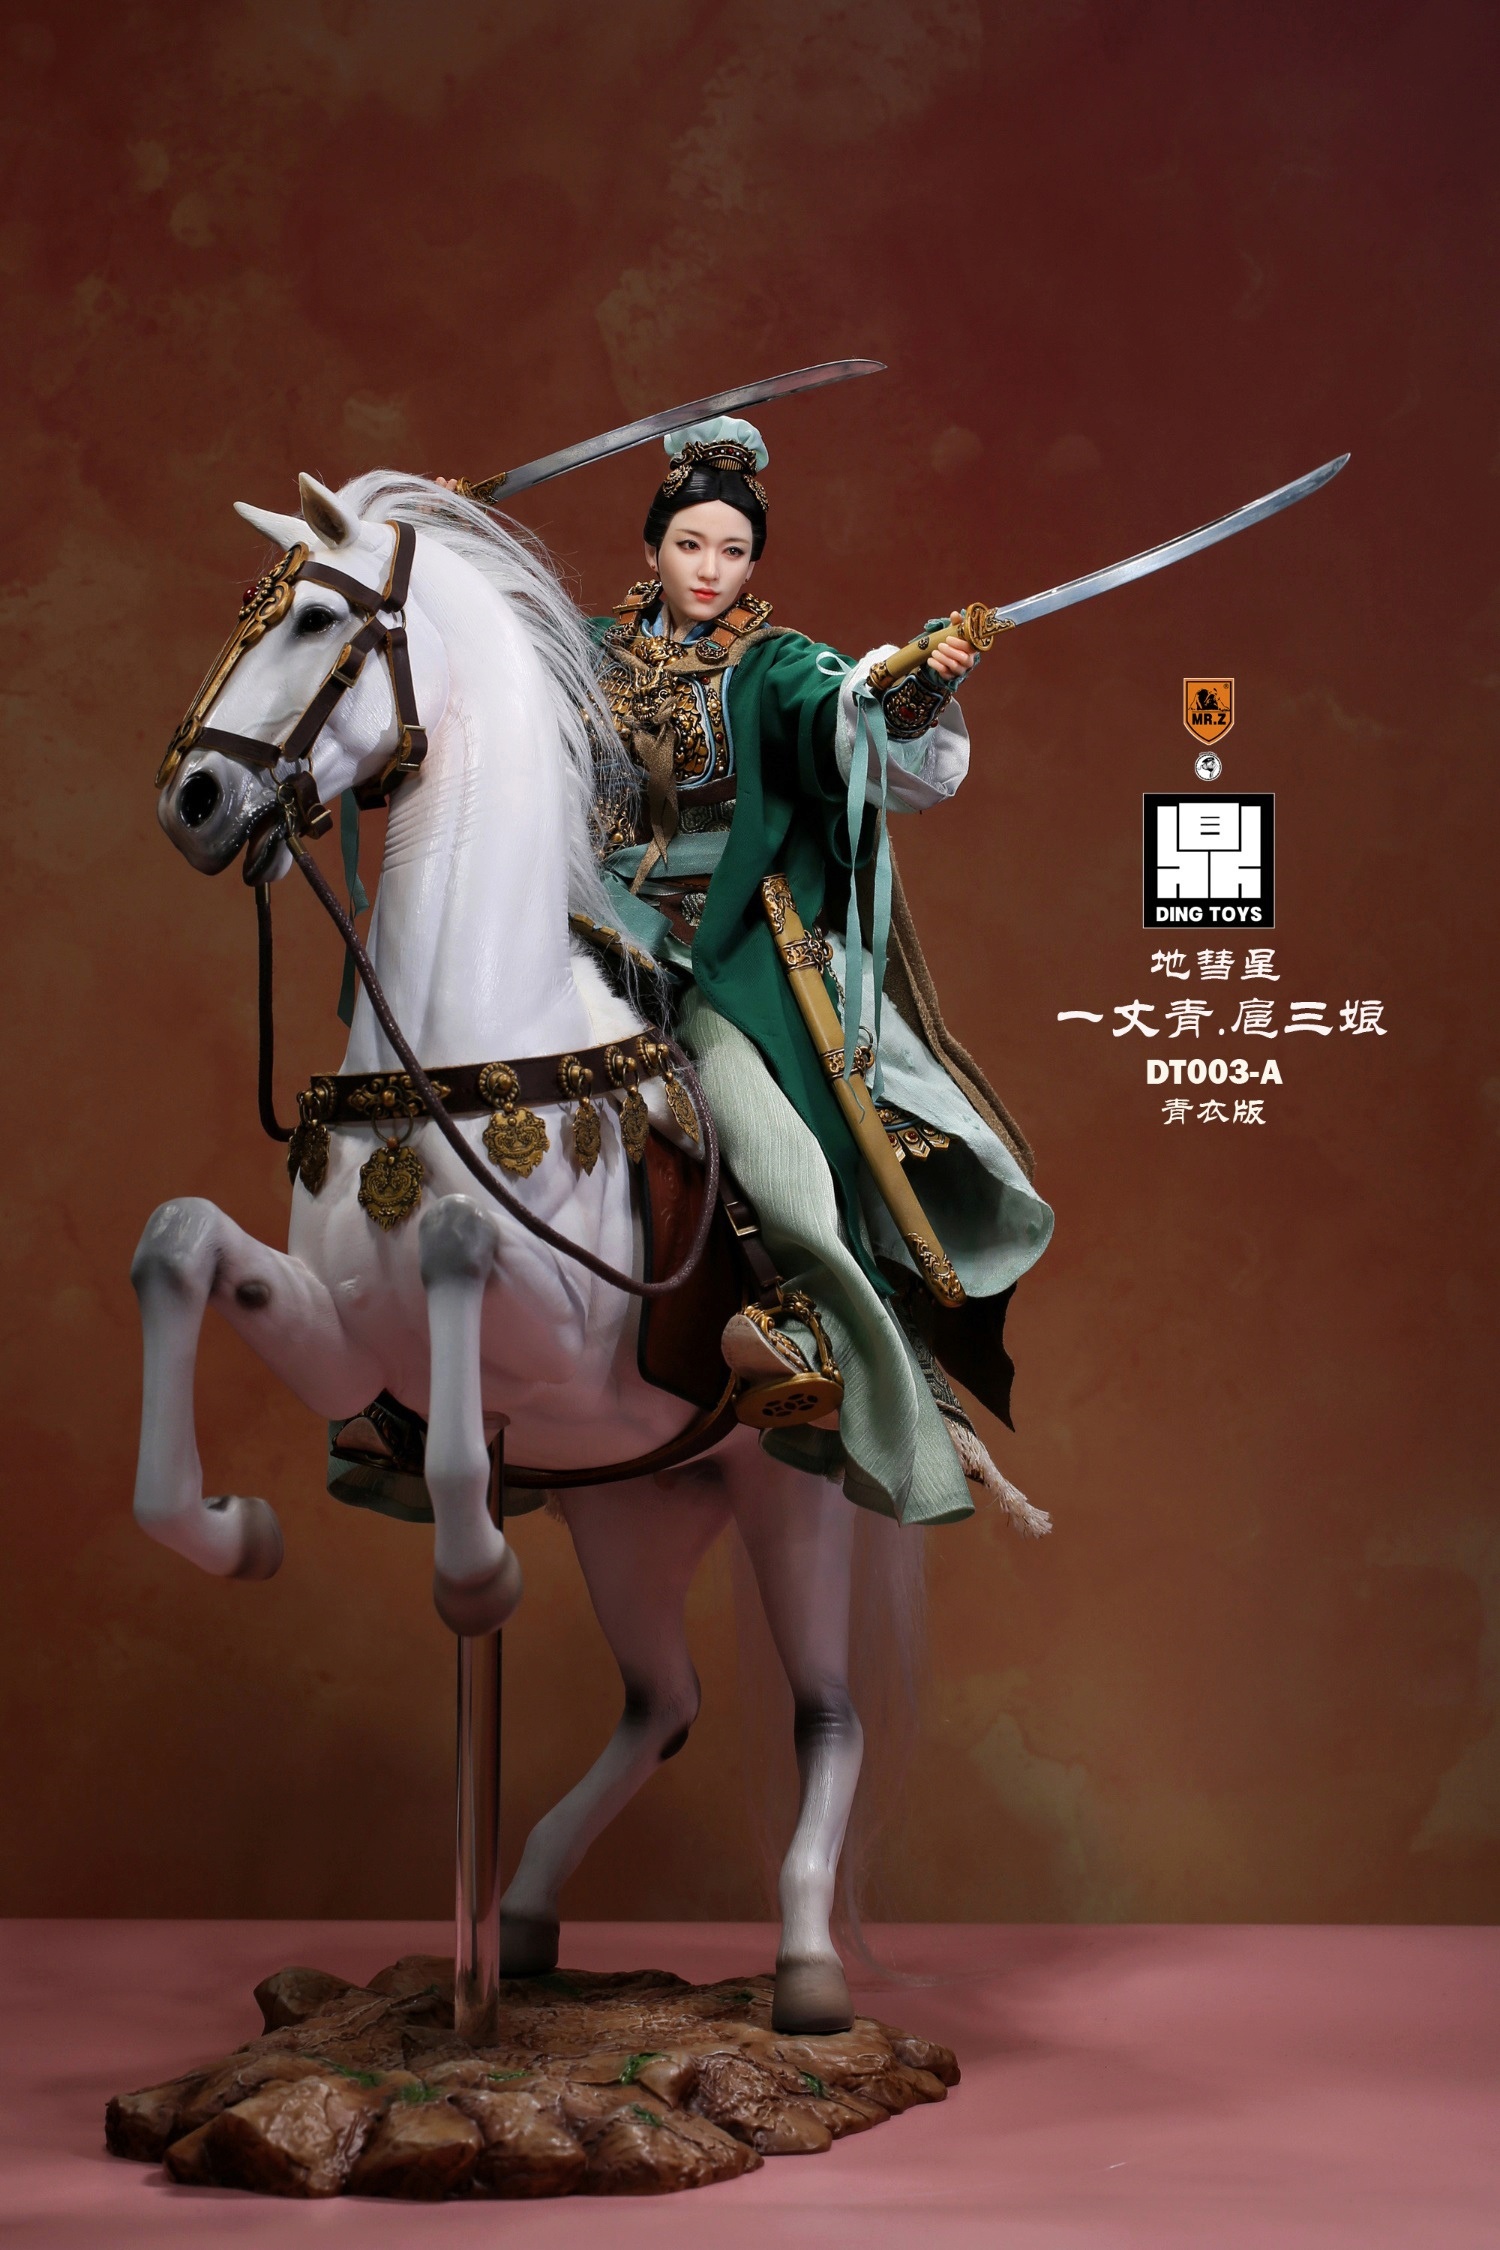 NEW PRODUCT: Mr.Z x Ding Toys DT003 1/6 Scale 《Water Margin》Shiying Zhang (Green and Red versions), Horse (White) 12228